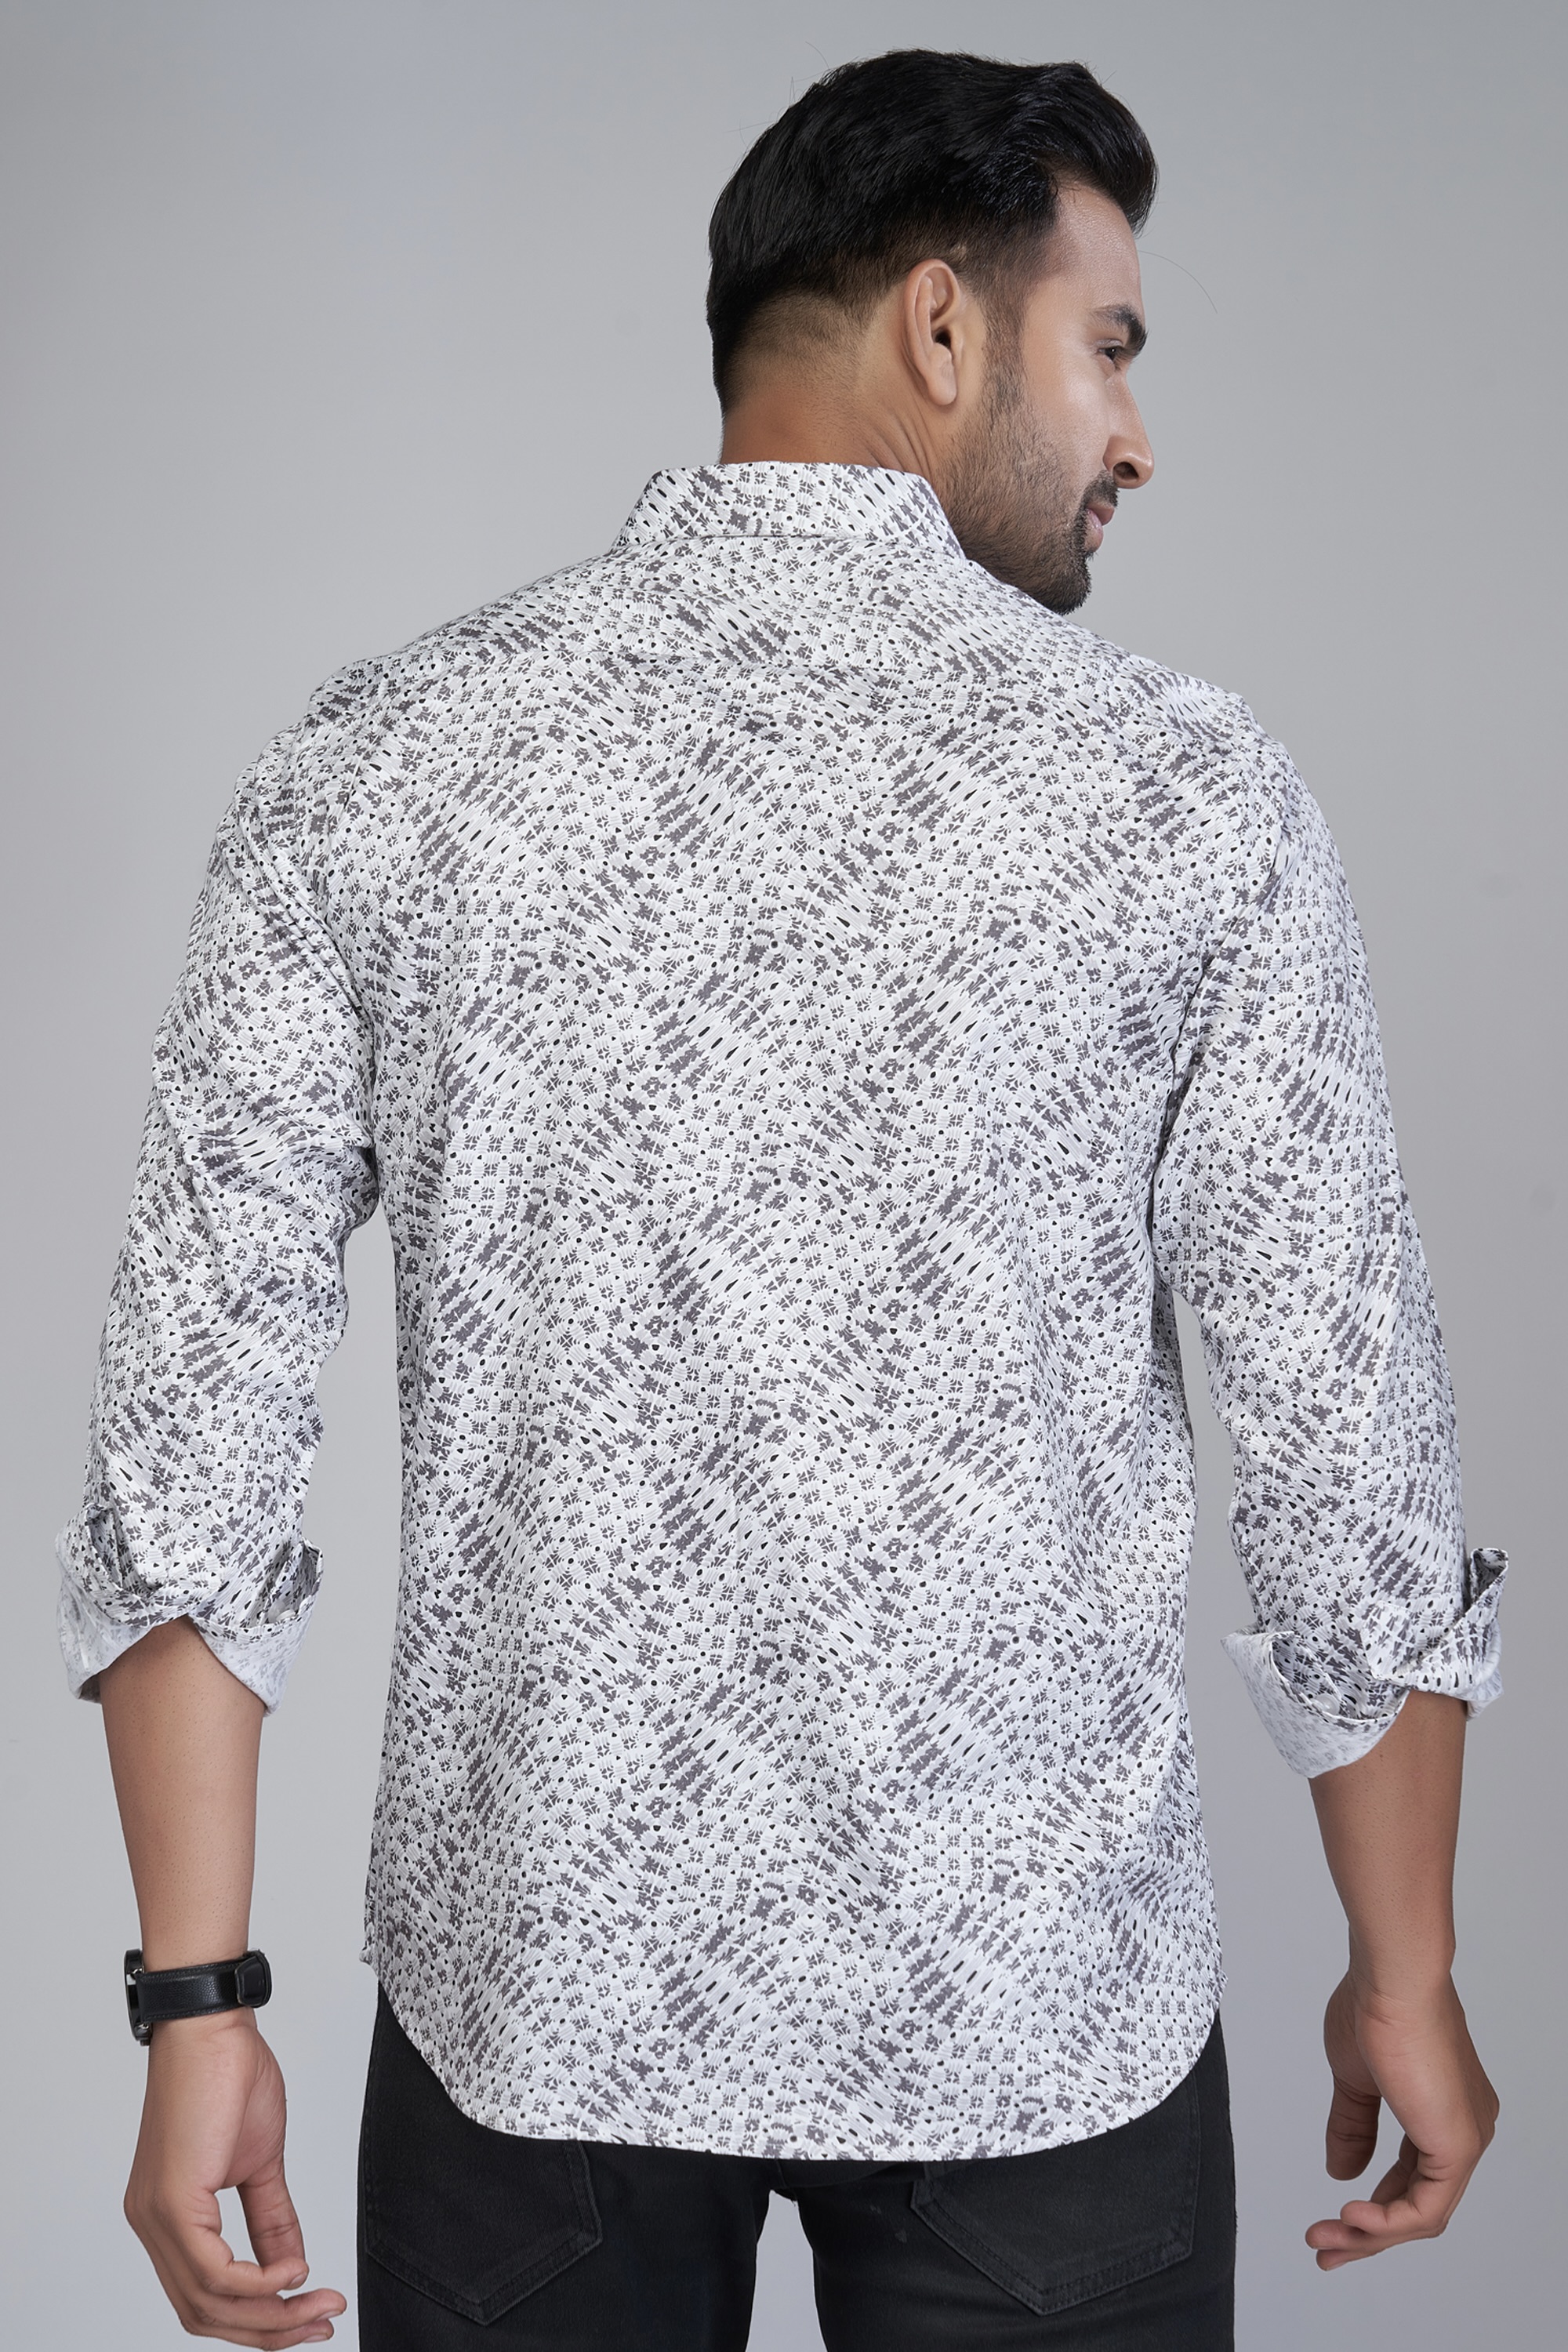 Black and White Printed Shirt for Men